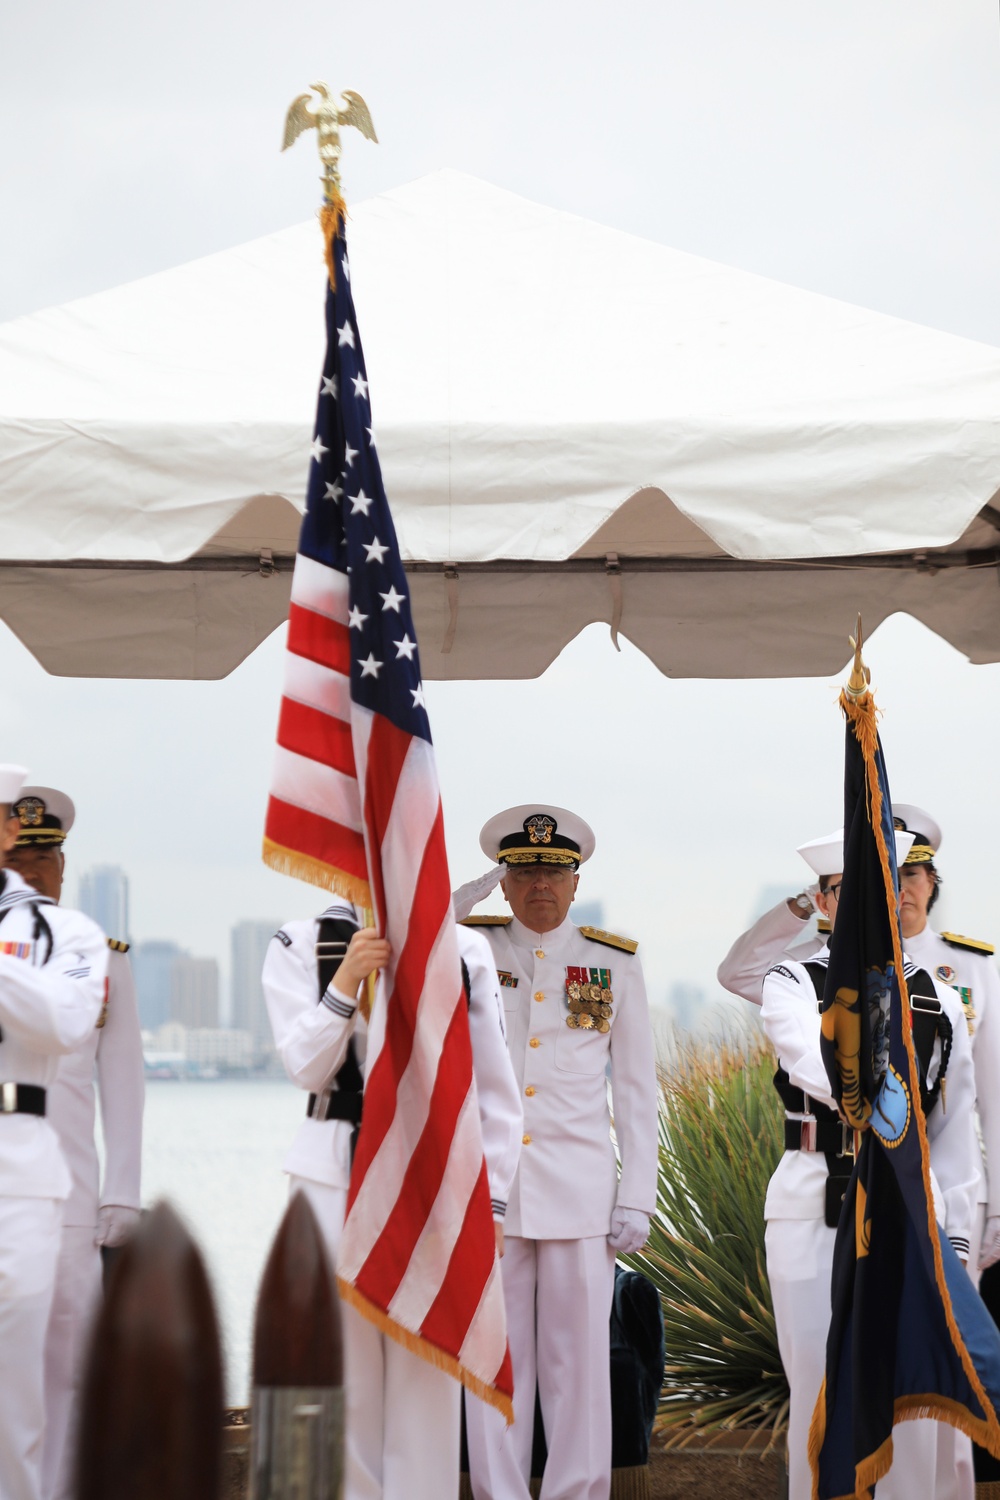 Rear Adm. Mark Bipes Retires after 37 Years of Service